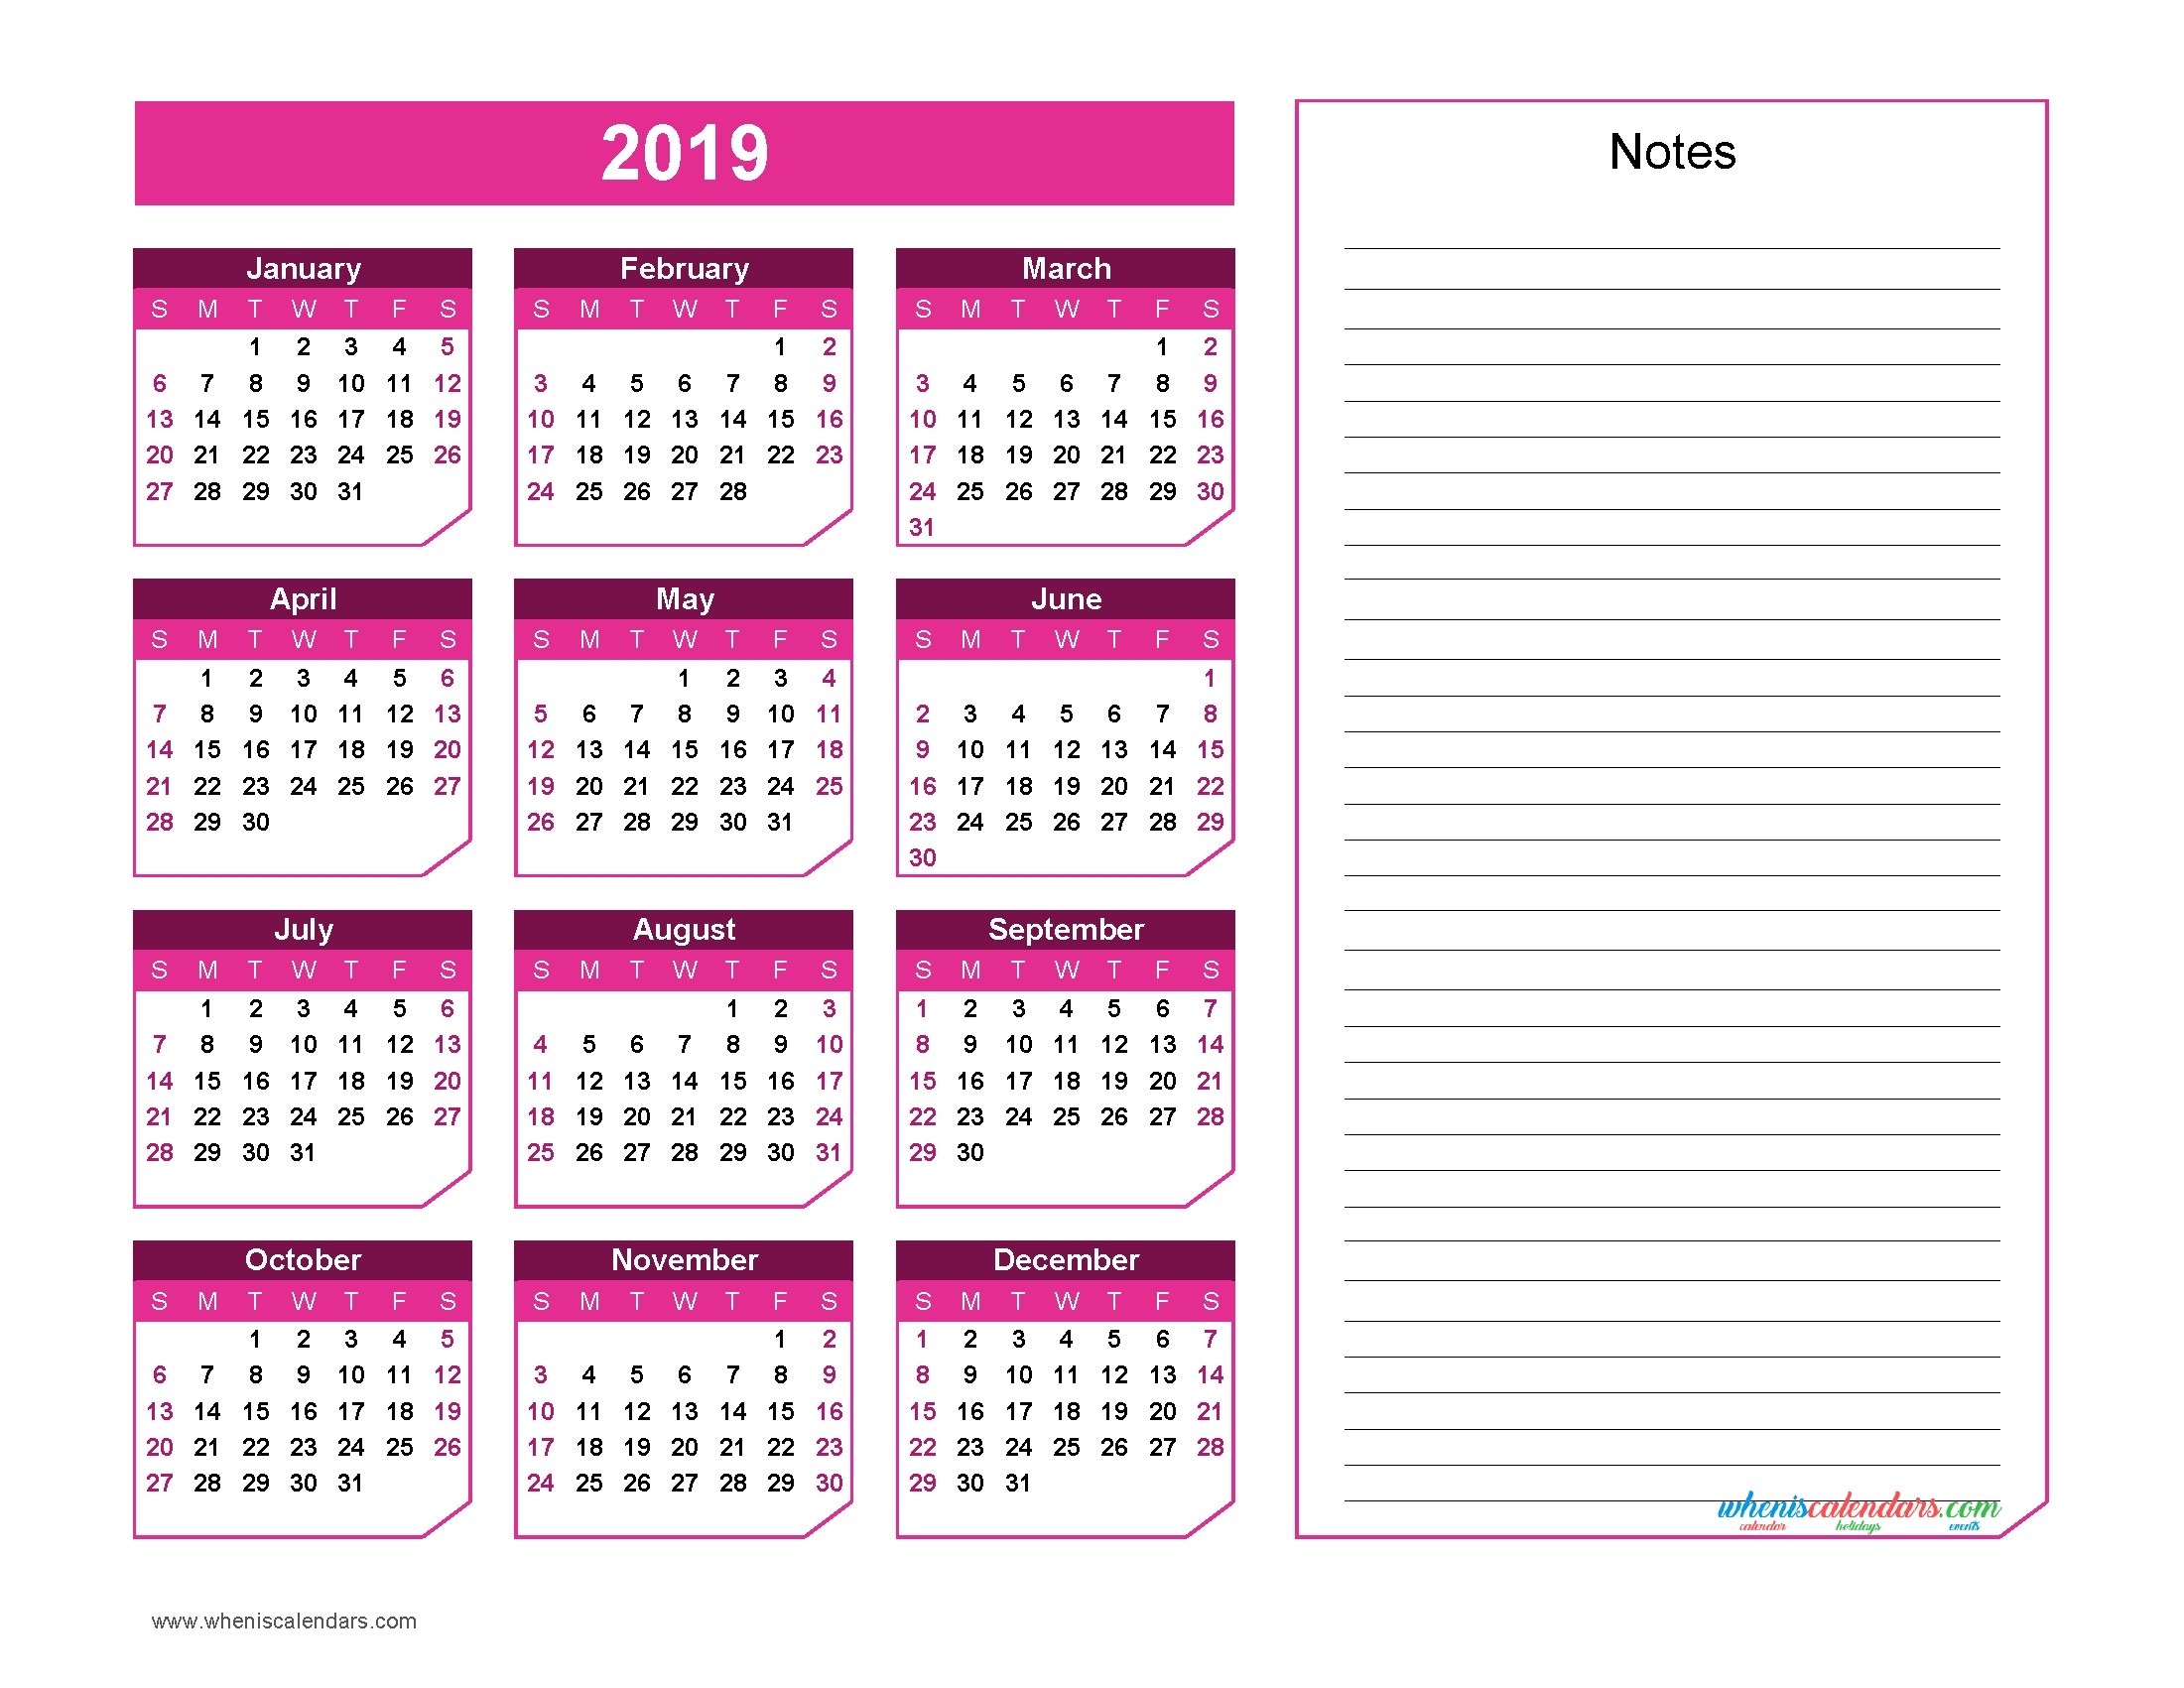 2019 Yearly Calendar With Notes Printable Chamfer Collection Redviolet